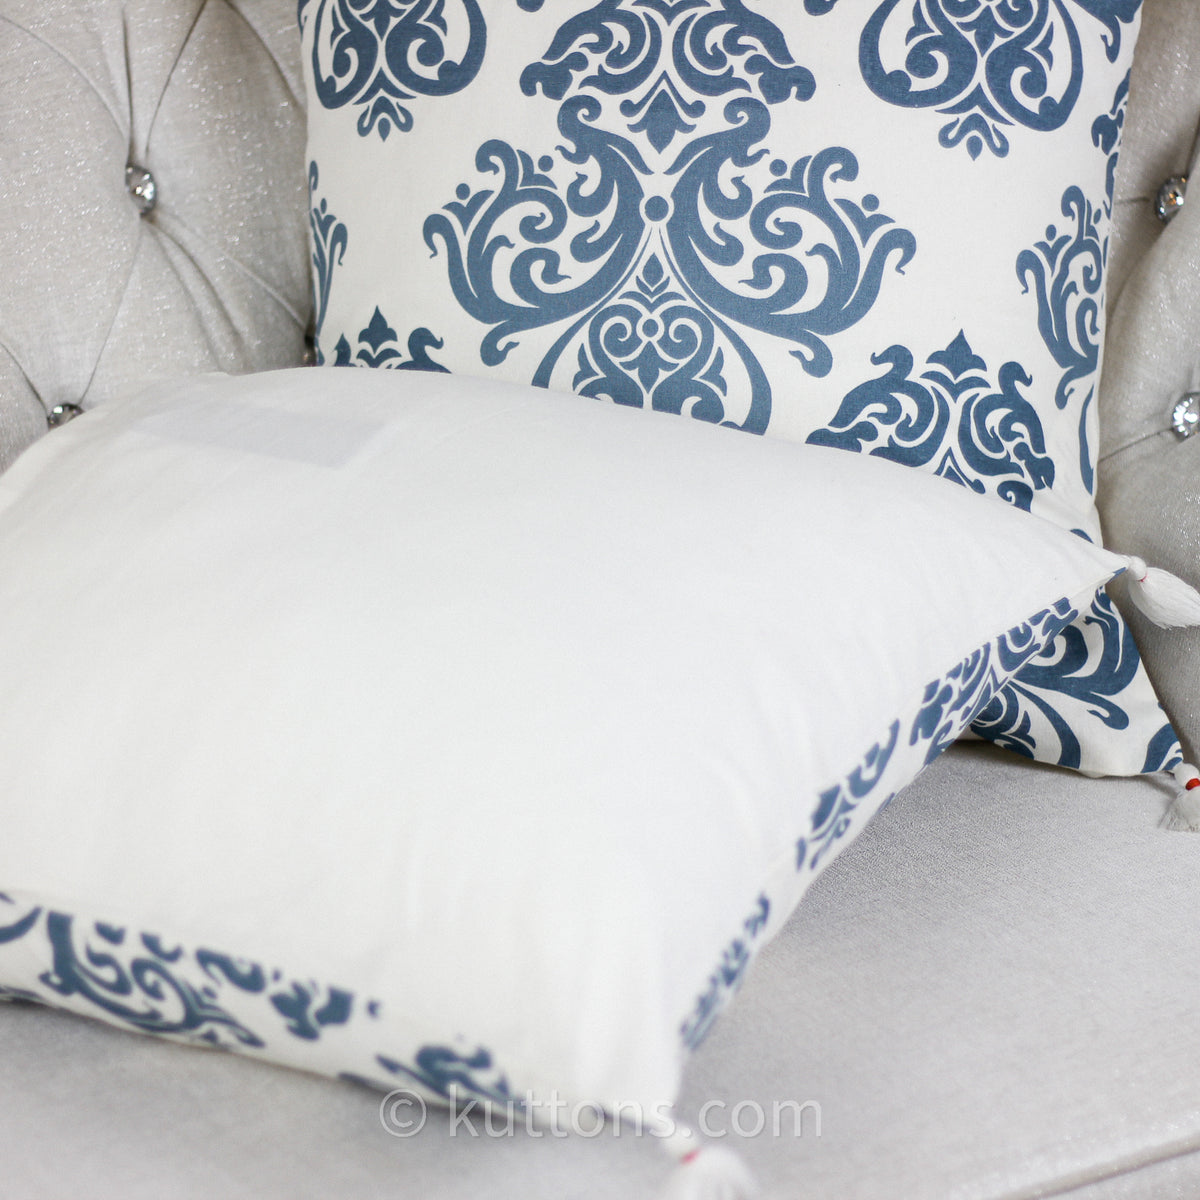 100% Cotton Throw Pillow Cover Hand Screen Printed with Damask Motif - Corner Tassels | Cream-Blue, Pair, 20x20"